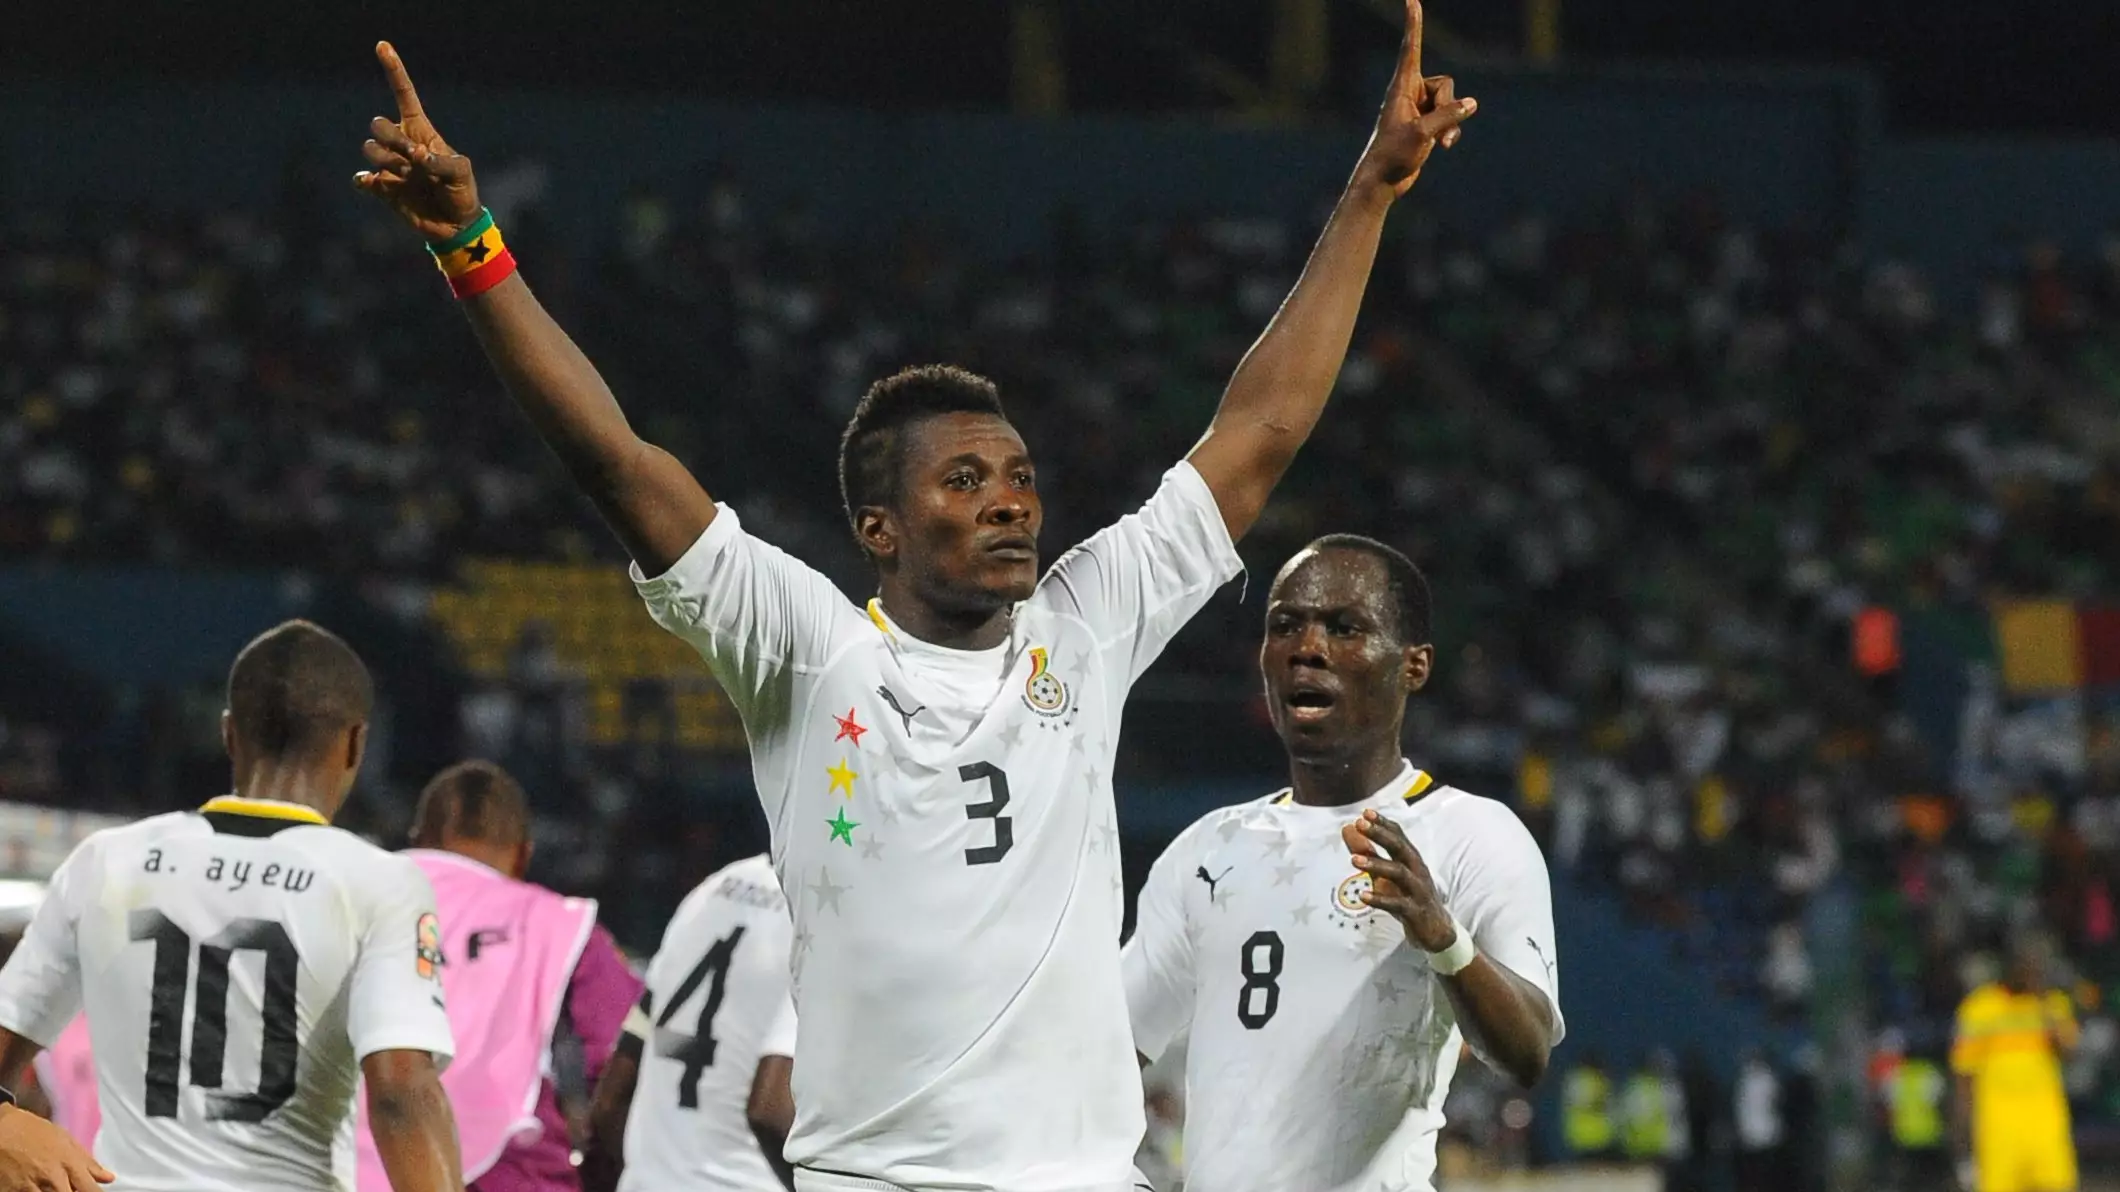 Asamoah Gyan Wore The Most Ridiculous Captain's Armband We've Seen